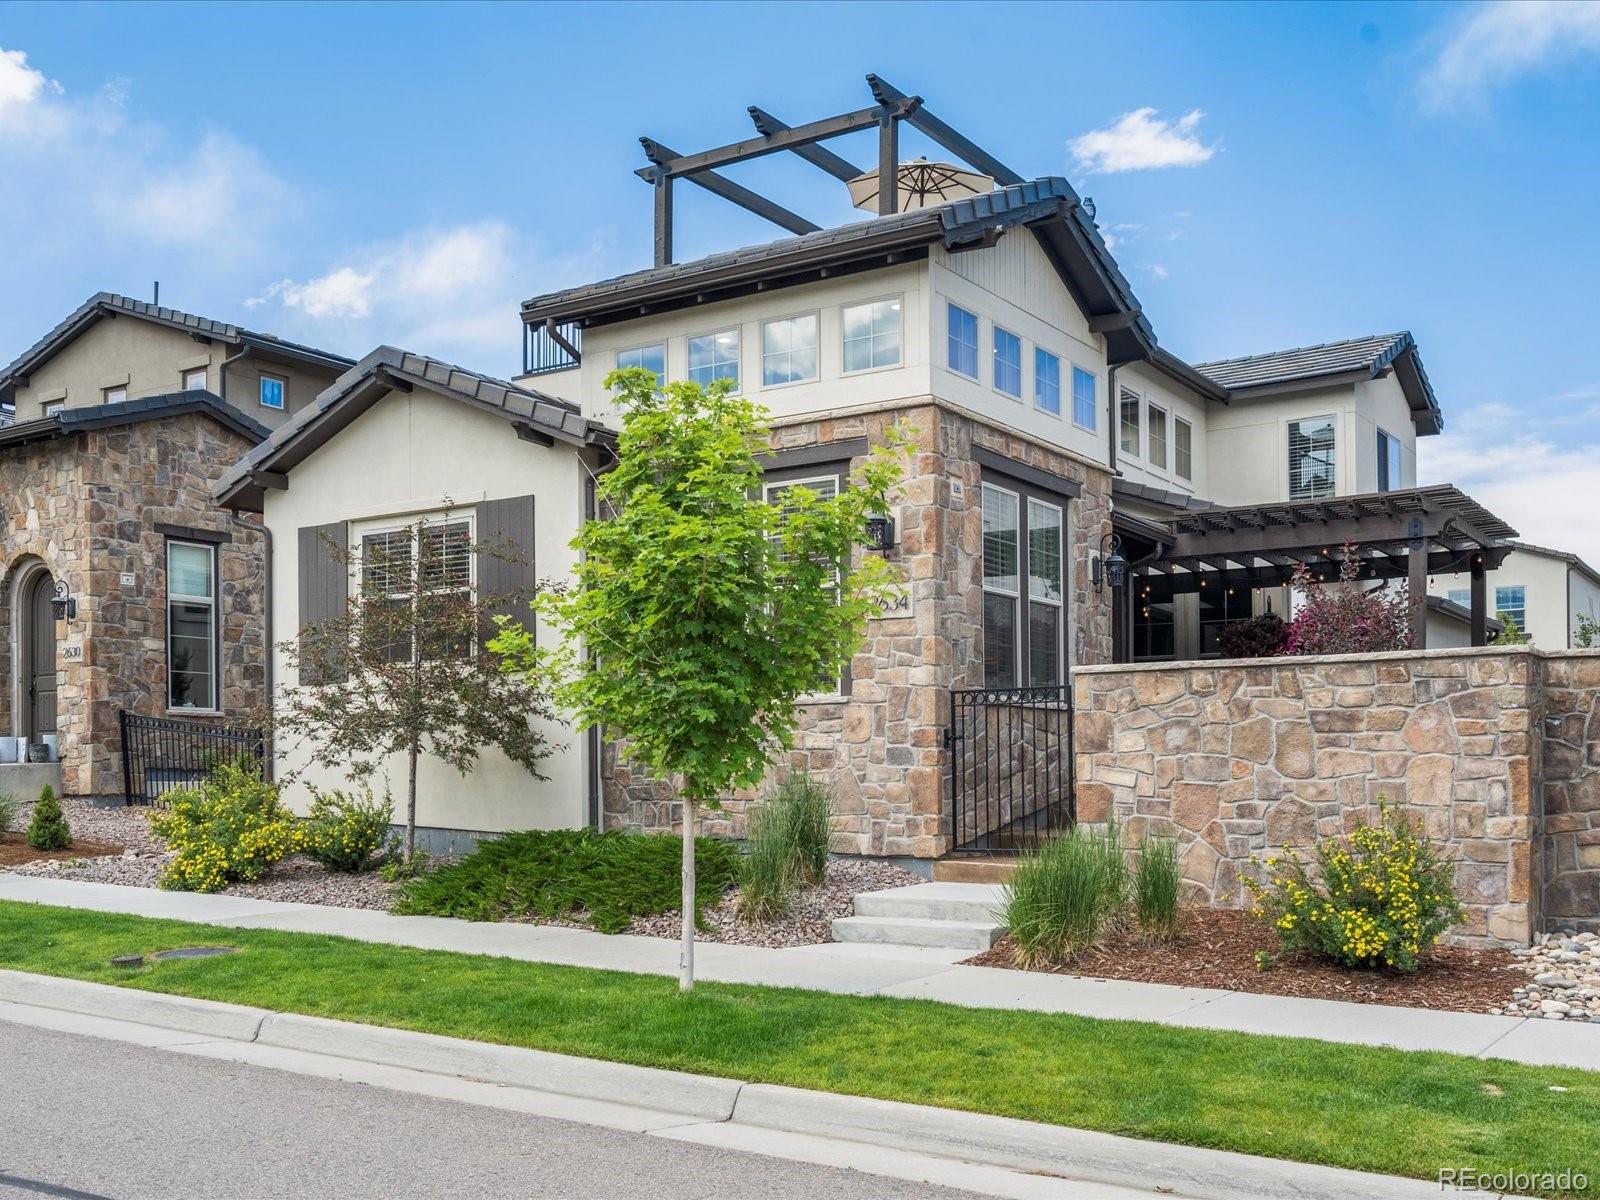 Report Image for 2634 S Orchard Street,Lakewood, Colorado